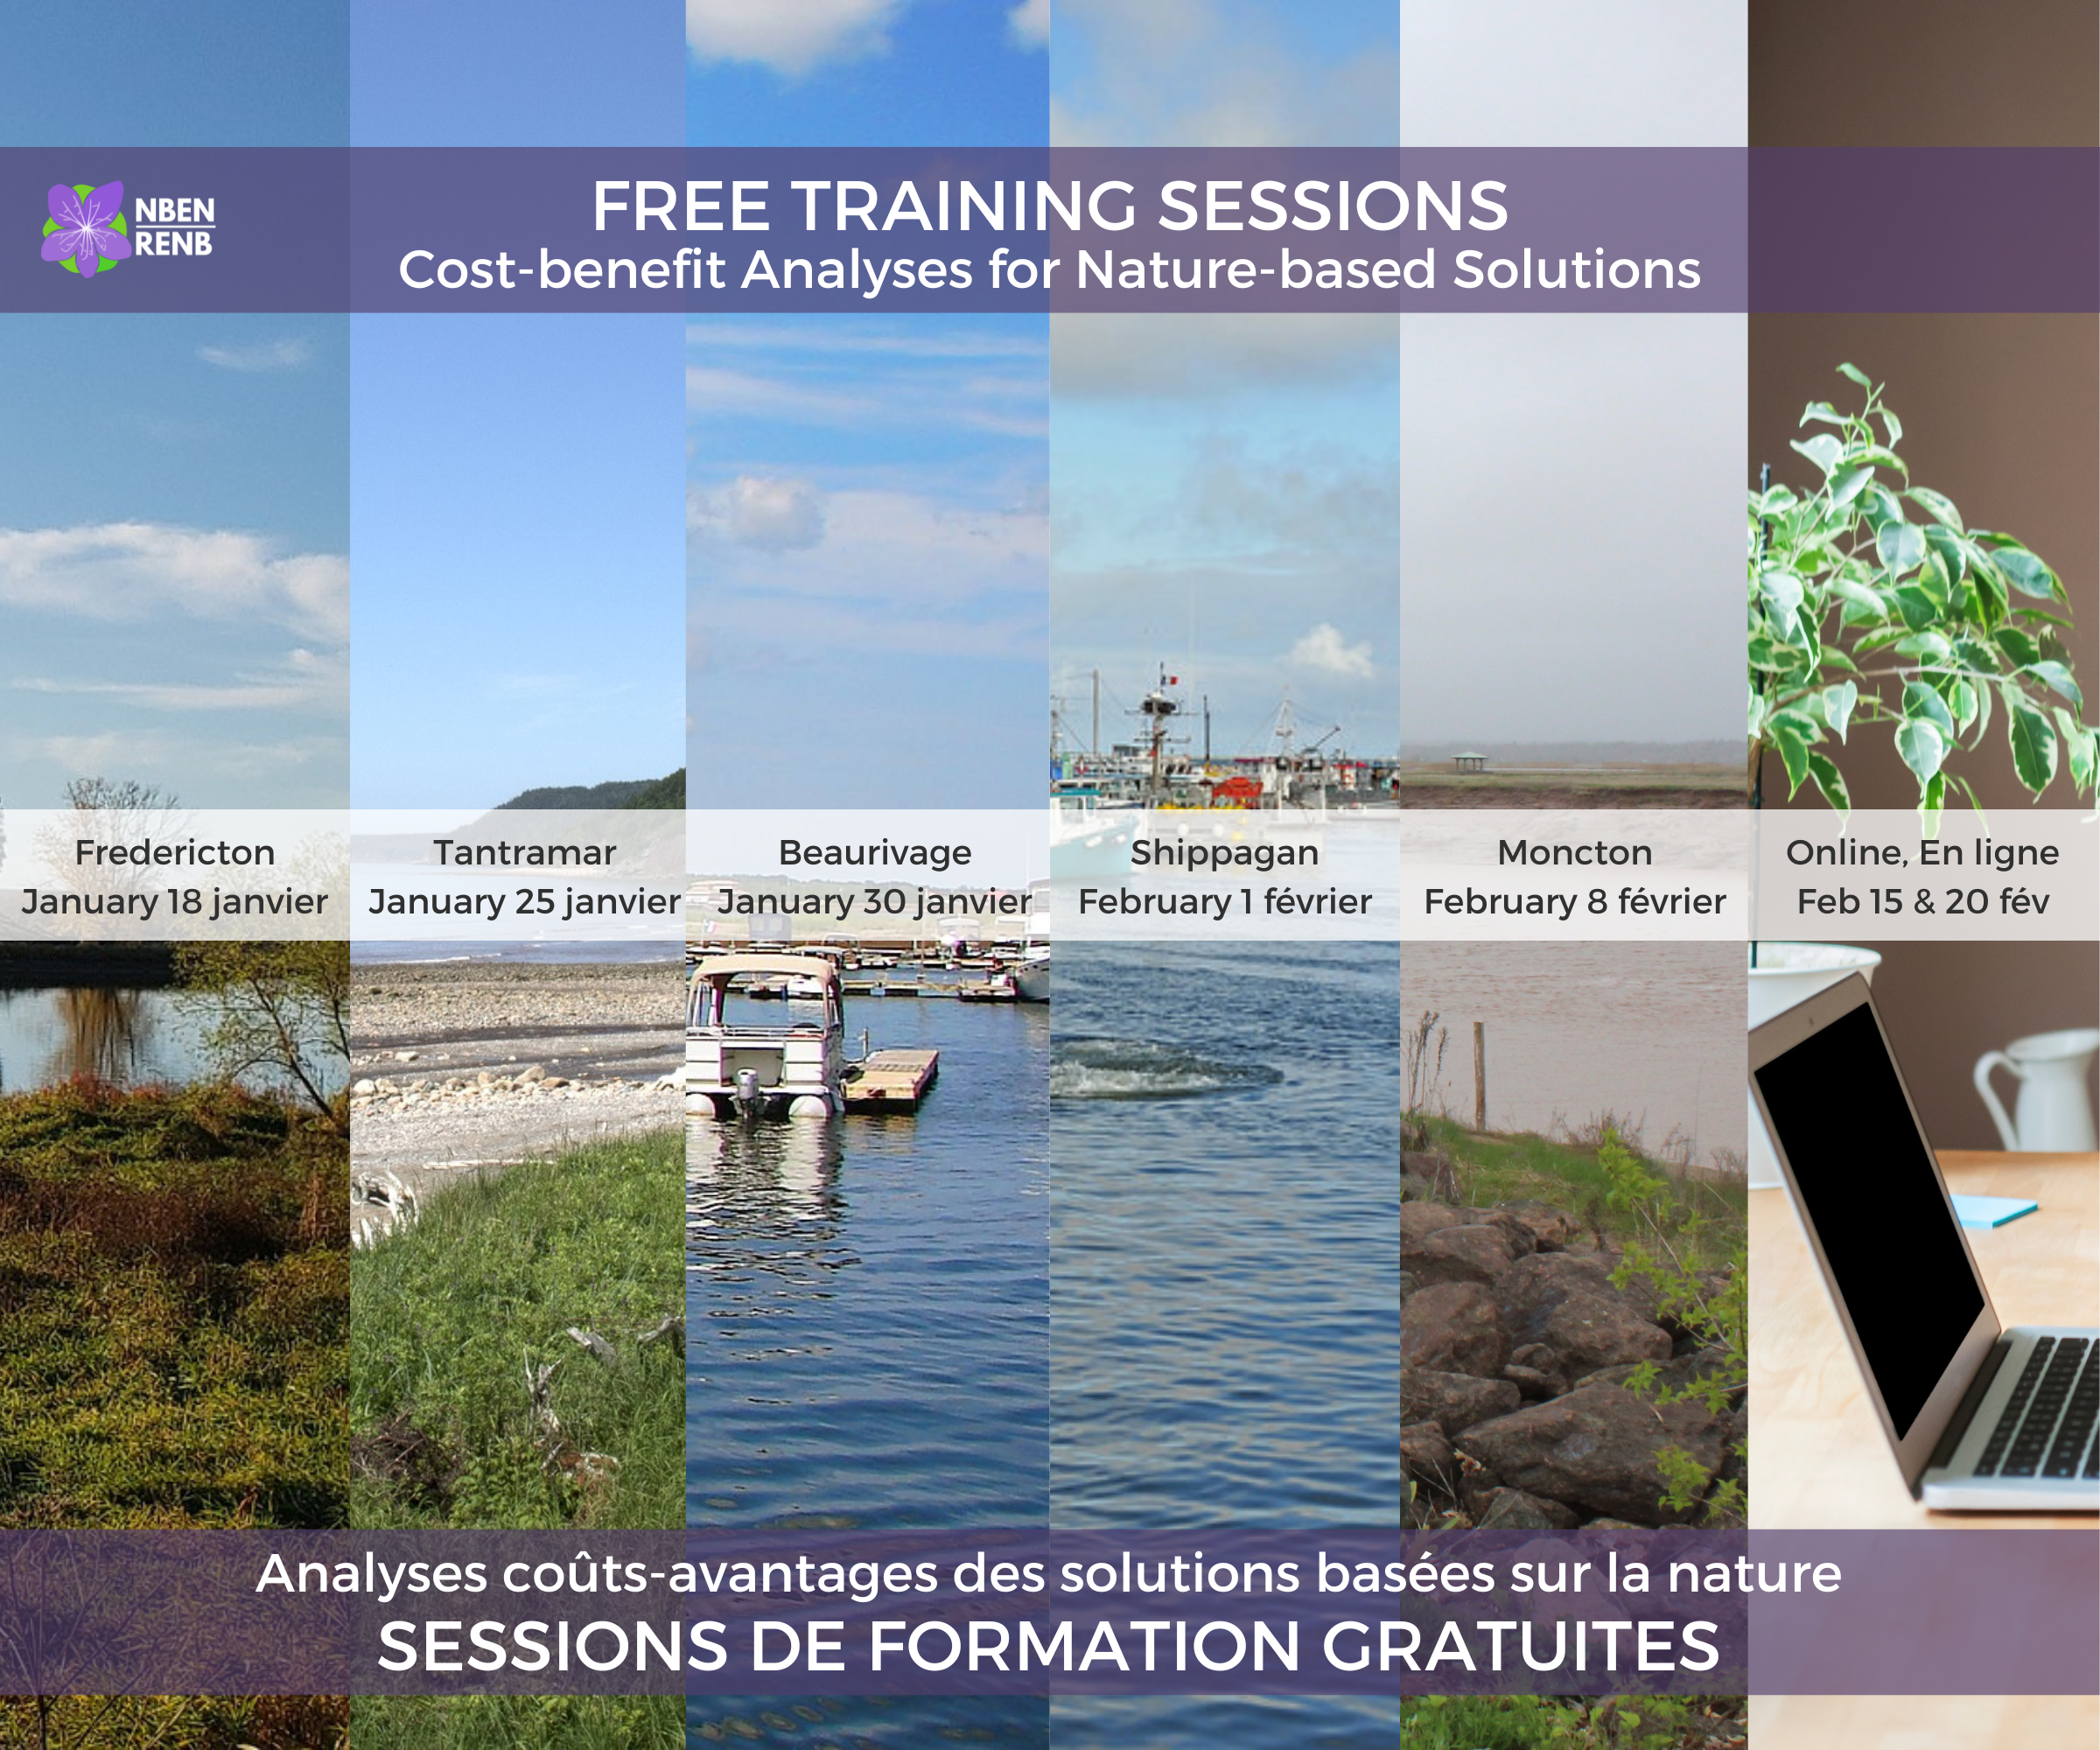 CANCELLED: Beaurivage Training Session: Conducting cost-benefit analyses for nature-based solutions